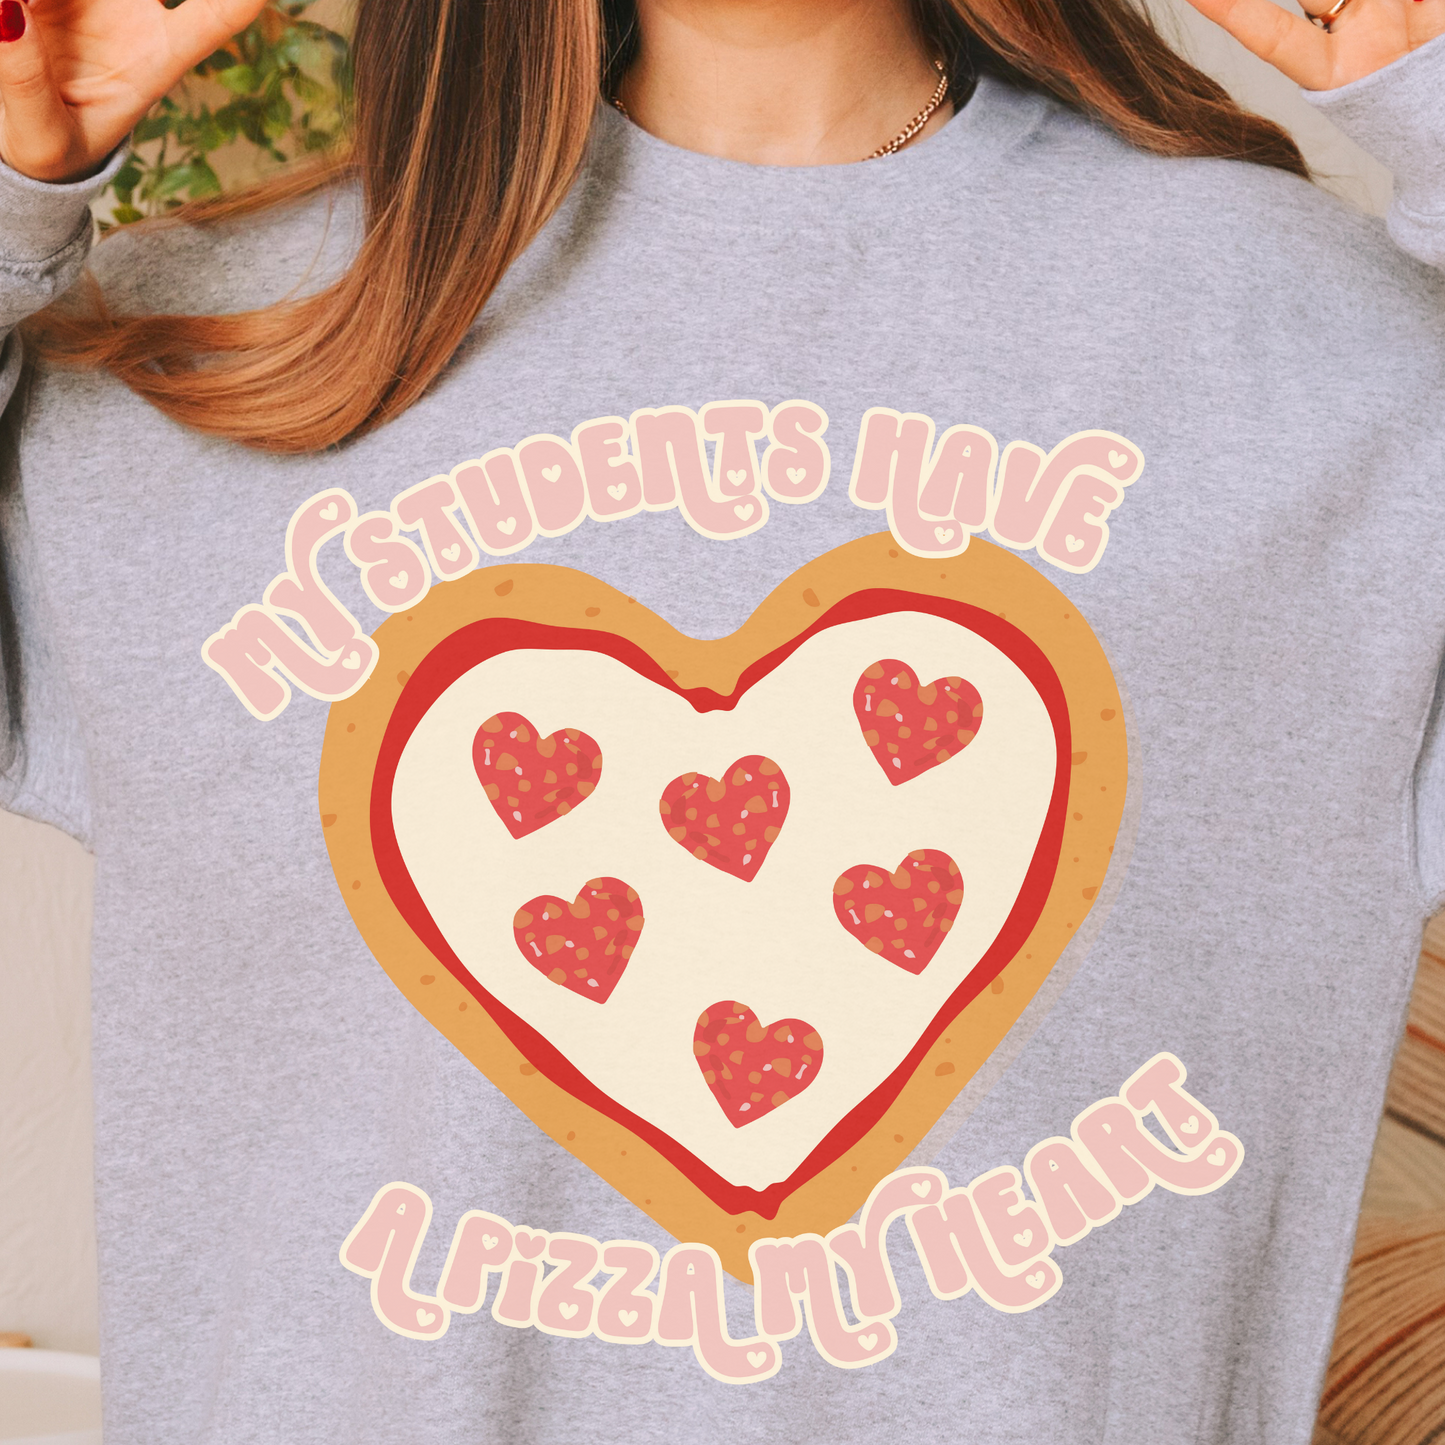 Pizza My Heart Pullover